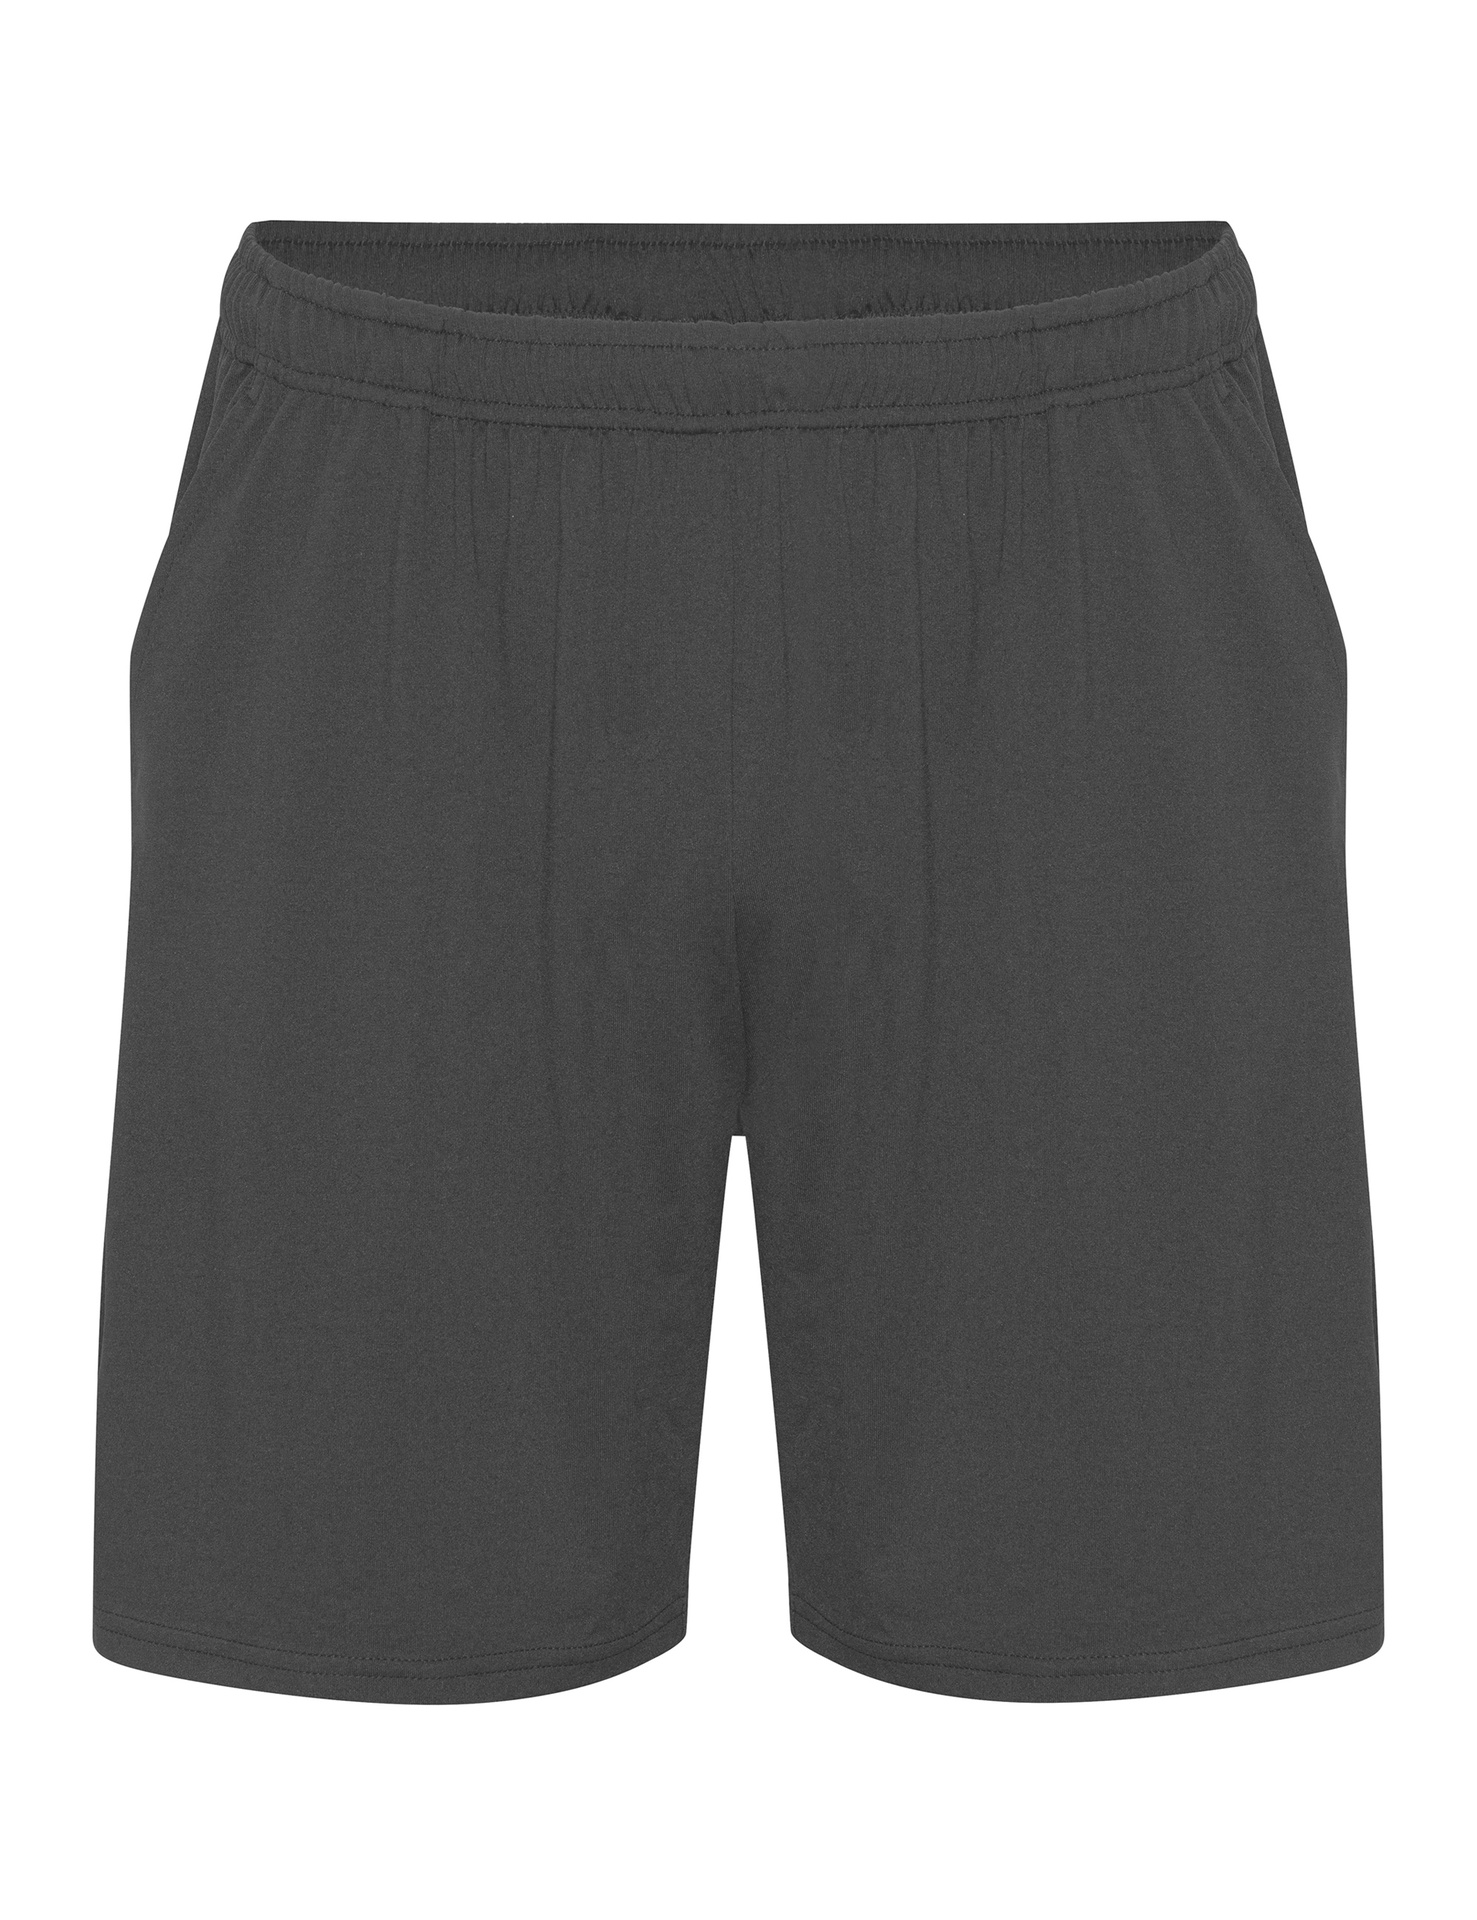 [PR/03871] Unisex Recycled Performance Shorts (Charcoal 06, S)